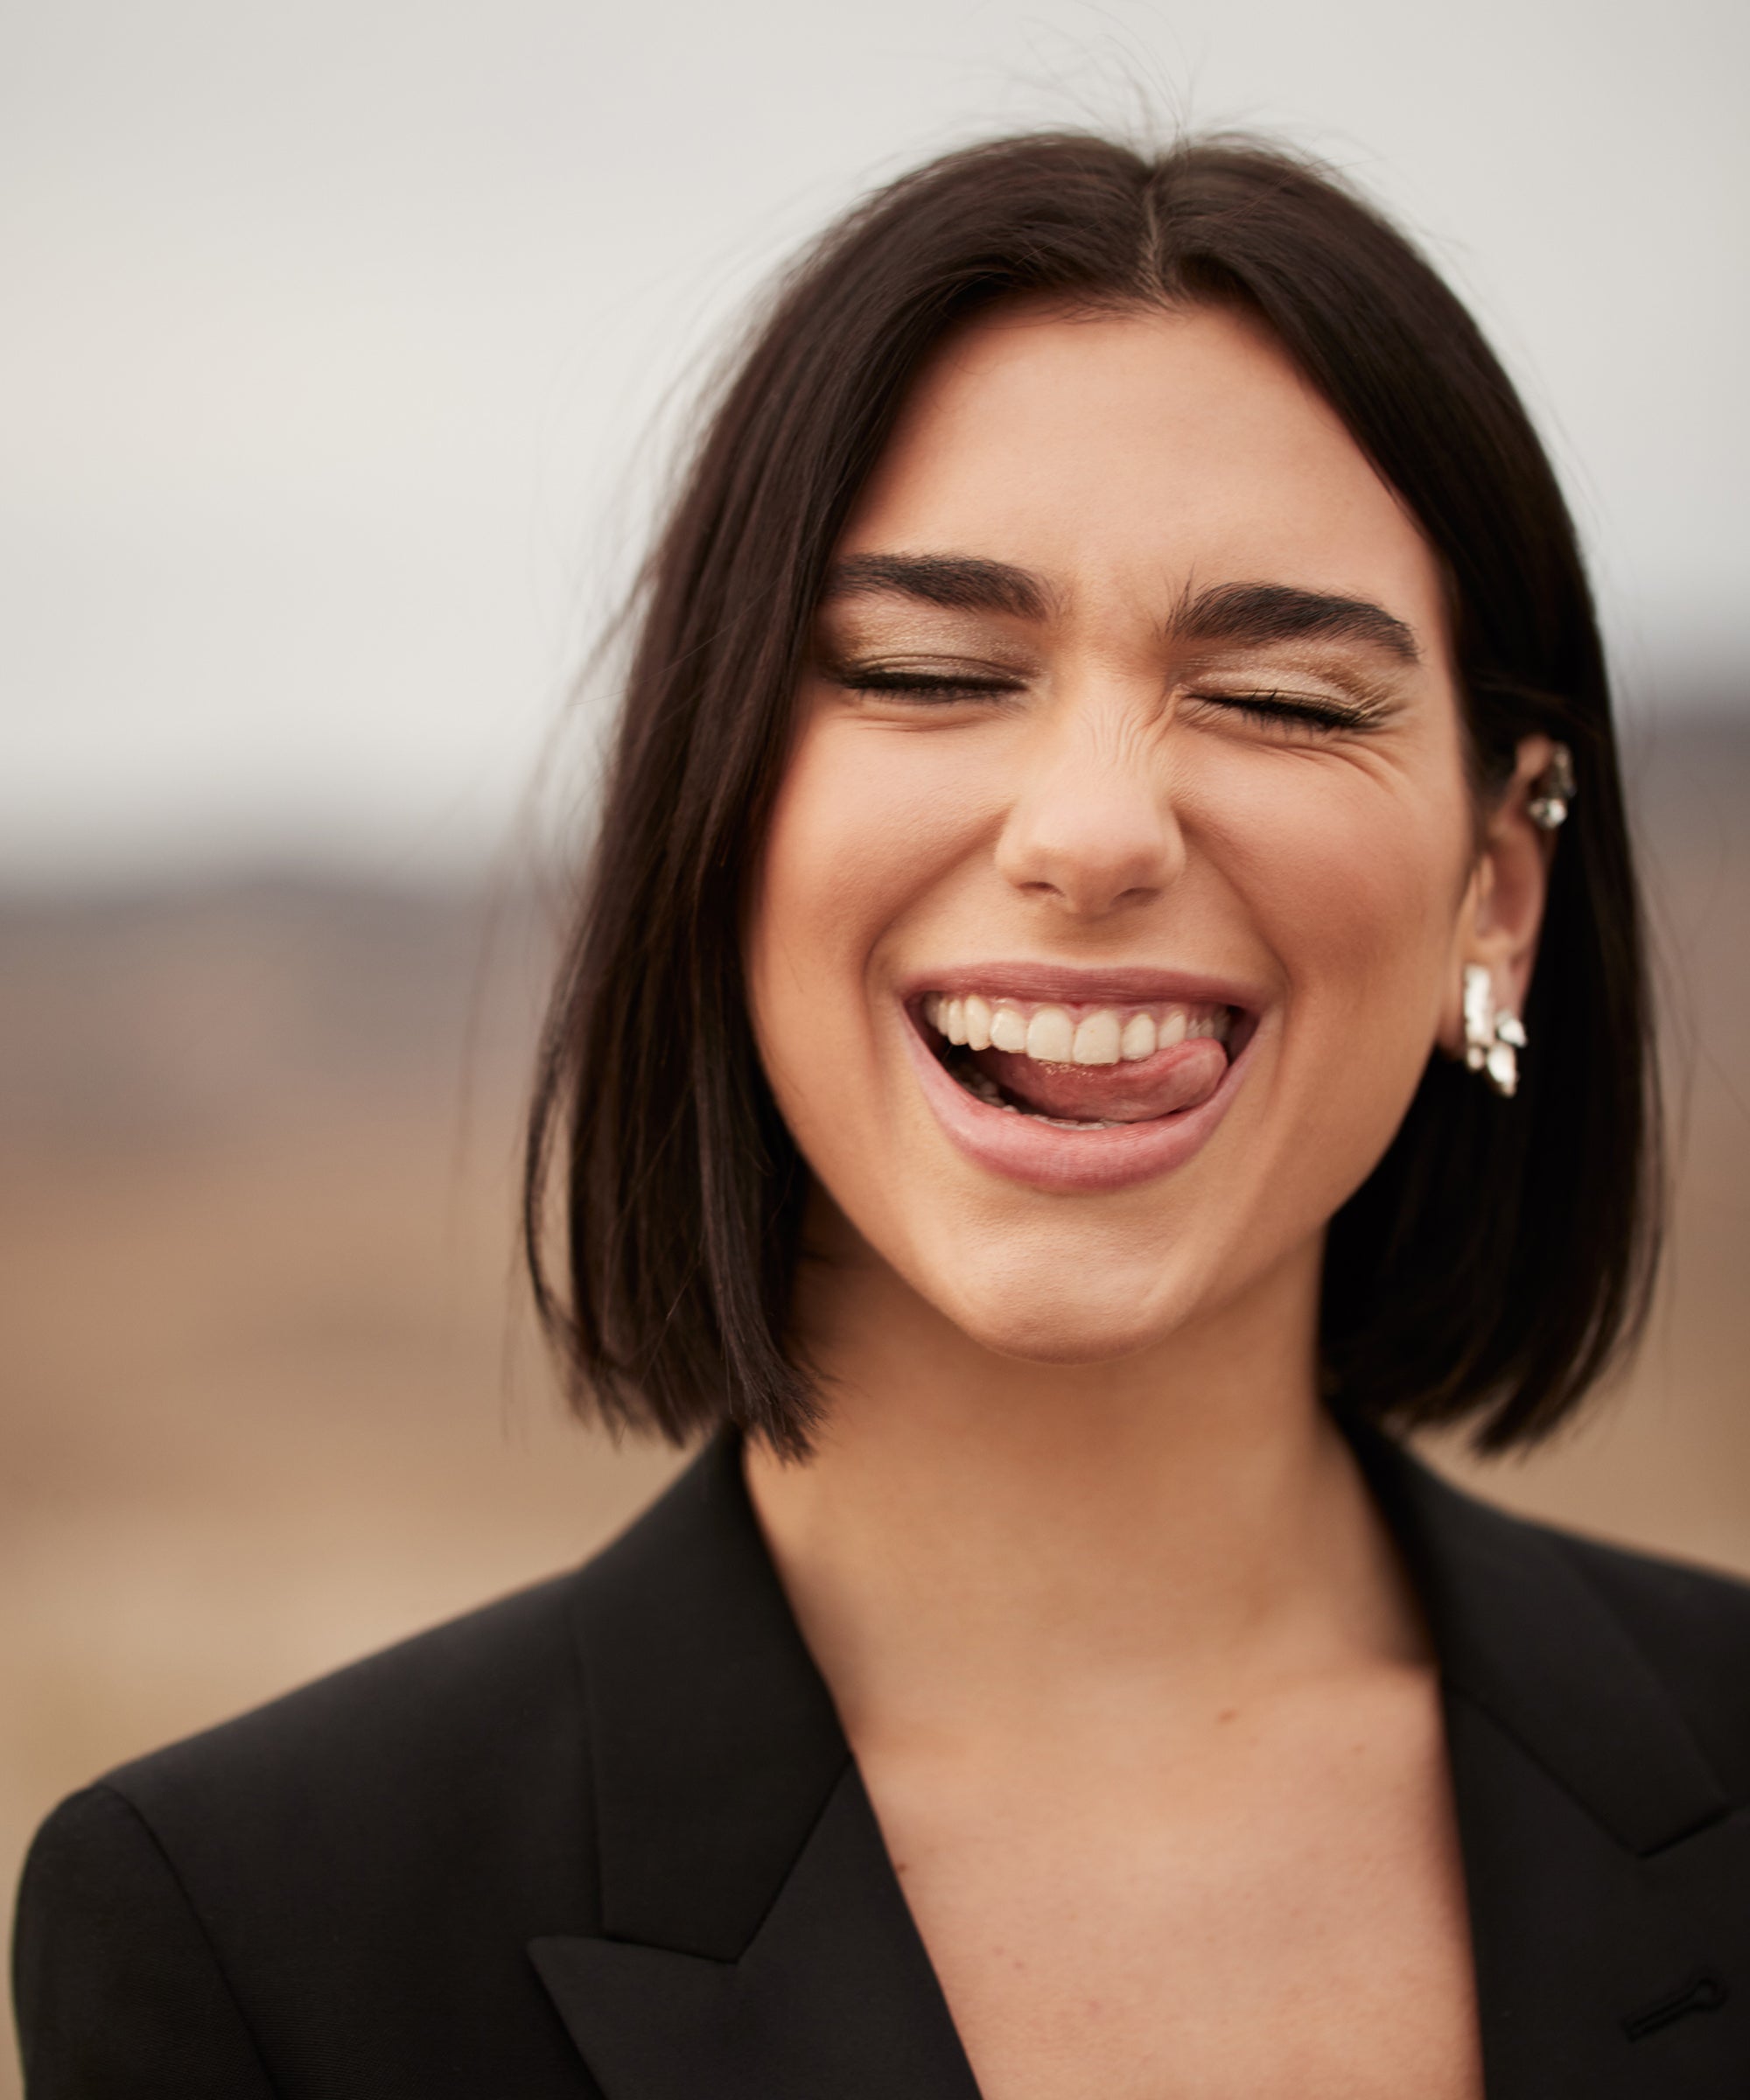 Dua Lipa Is the Face of YSL Libre Abslou Platine